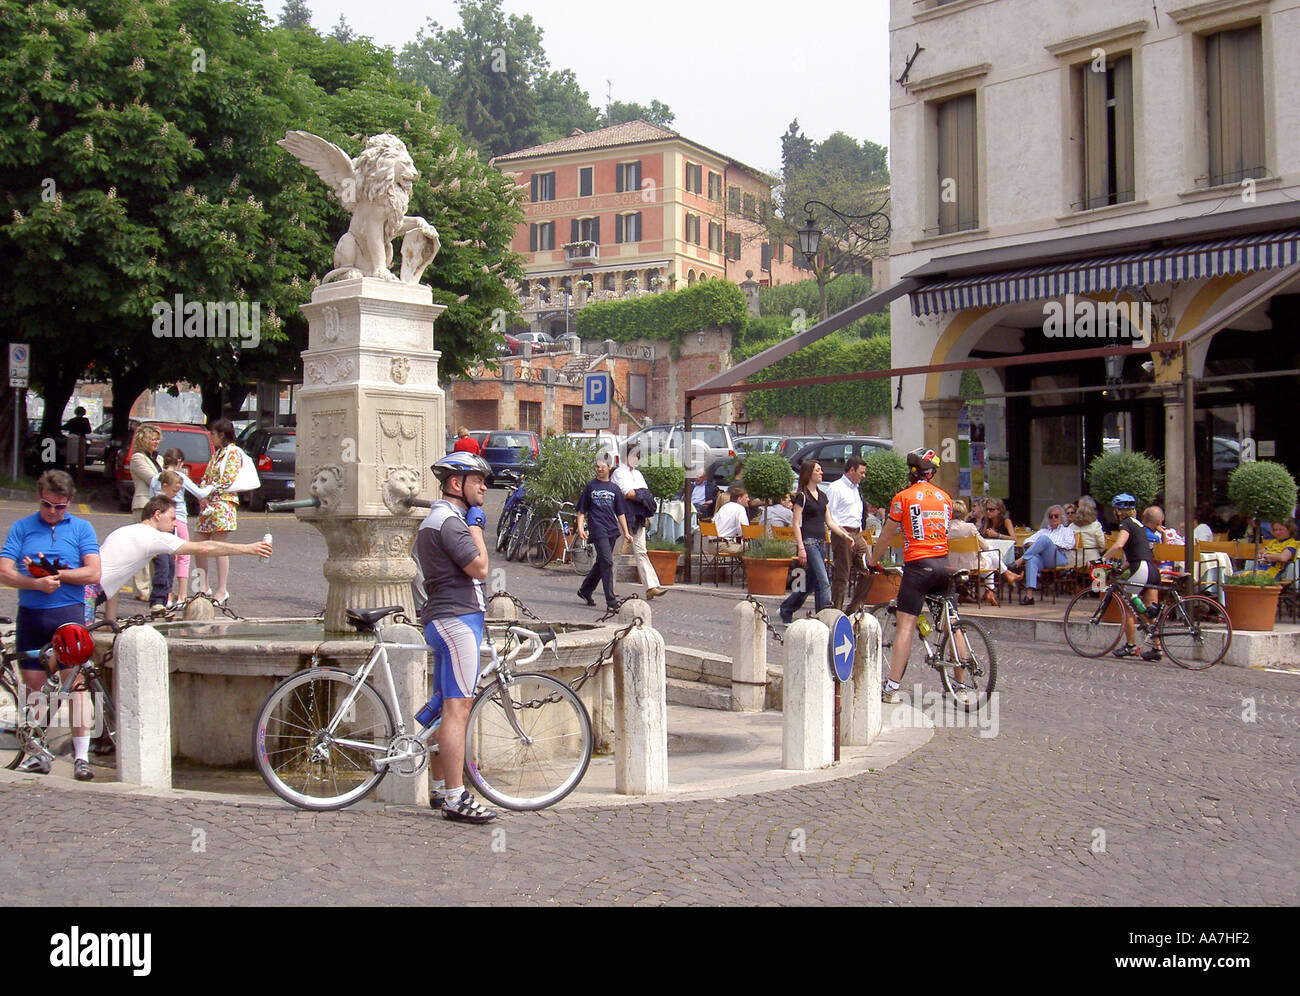 Weekend cyclists take a break beside the fountain in the Piazza Garibaldi, in the ancient town centre of Asolo, Treviso, Italy Stock Photo